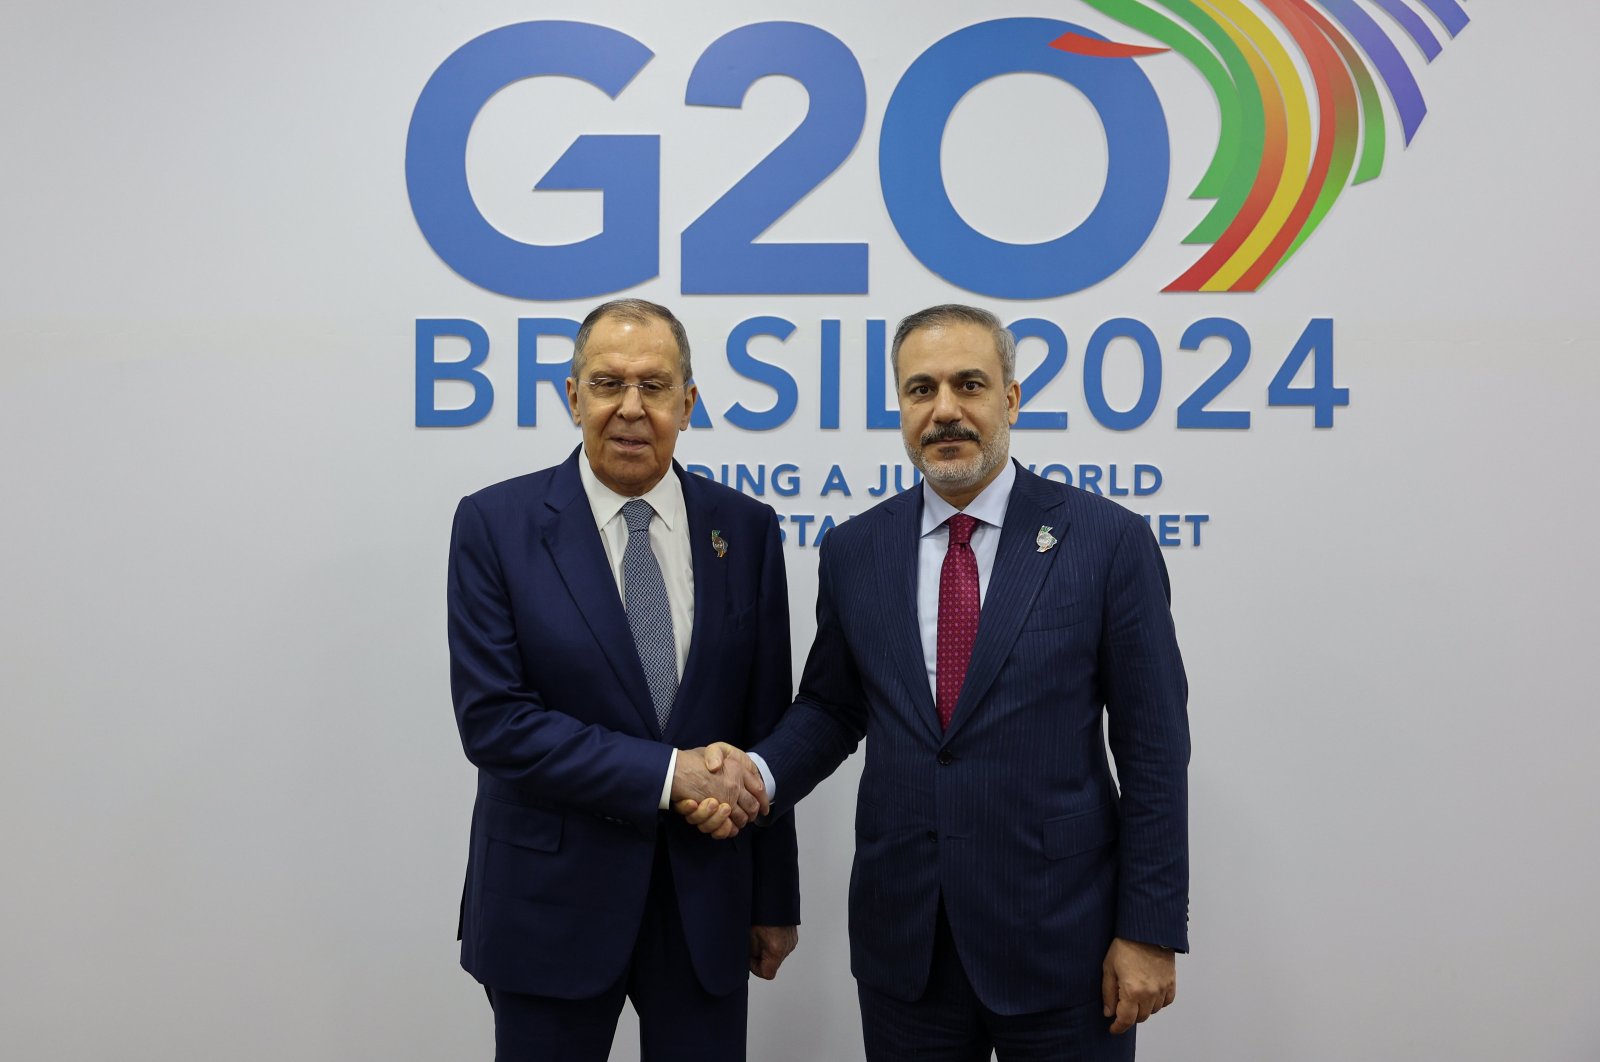 Foreign Minister Hakan Fidan and his Russian counterpart Sergey Lavrov shake hands as they meet at the G-20 Foreign Ministers' meeting in Rio de Janeiro, Brazil, Feb. 22, 2024. (AA Photo)